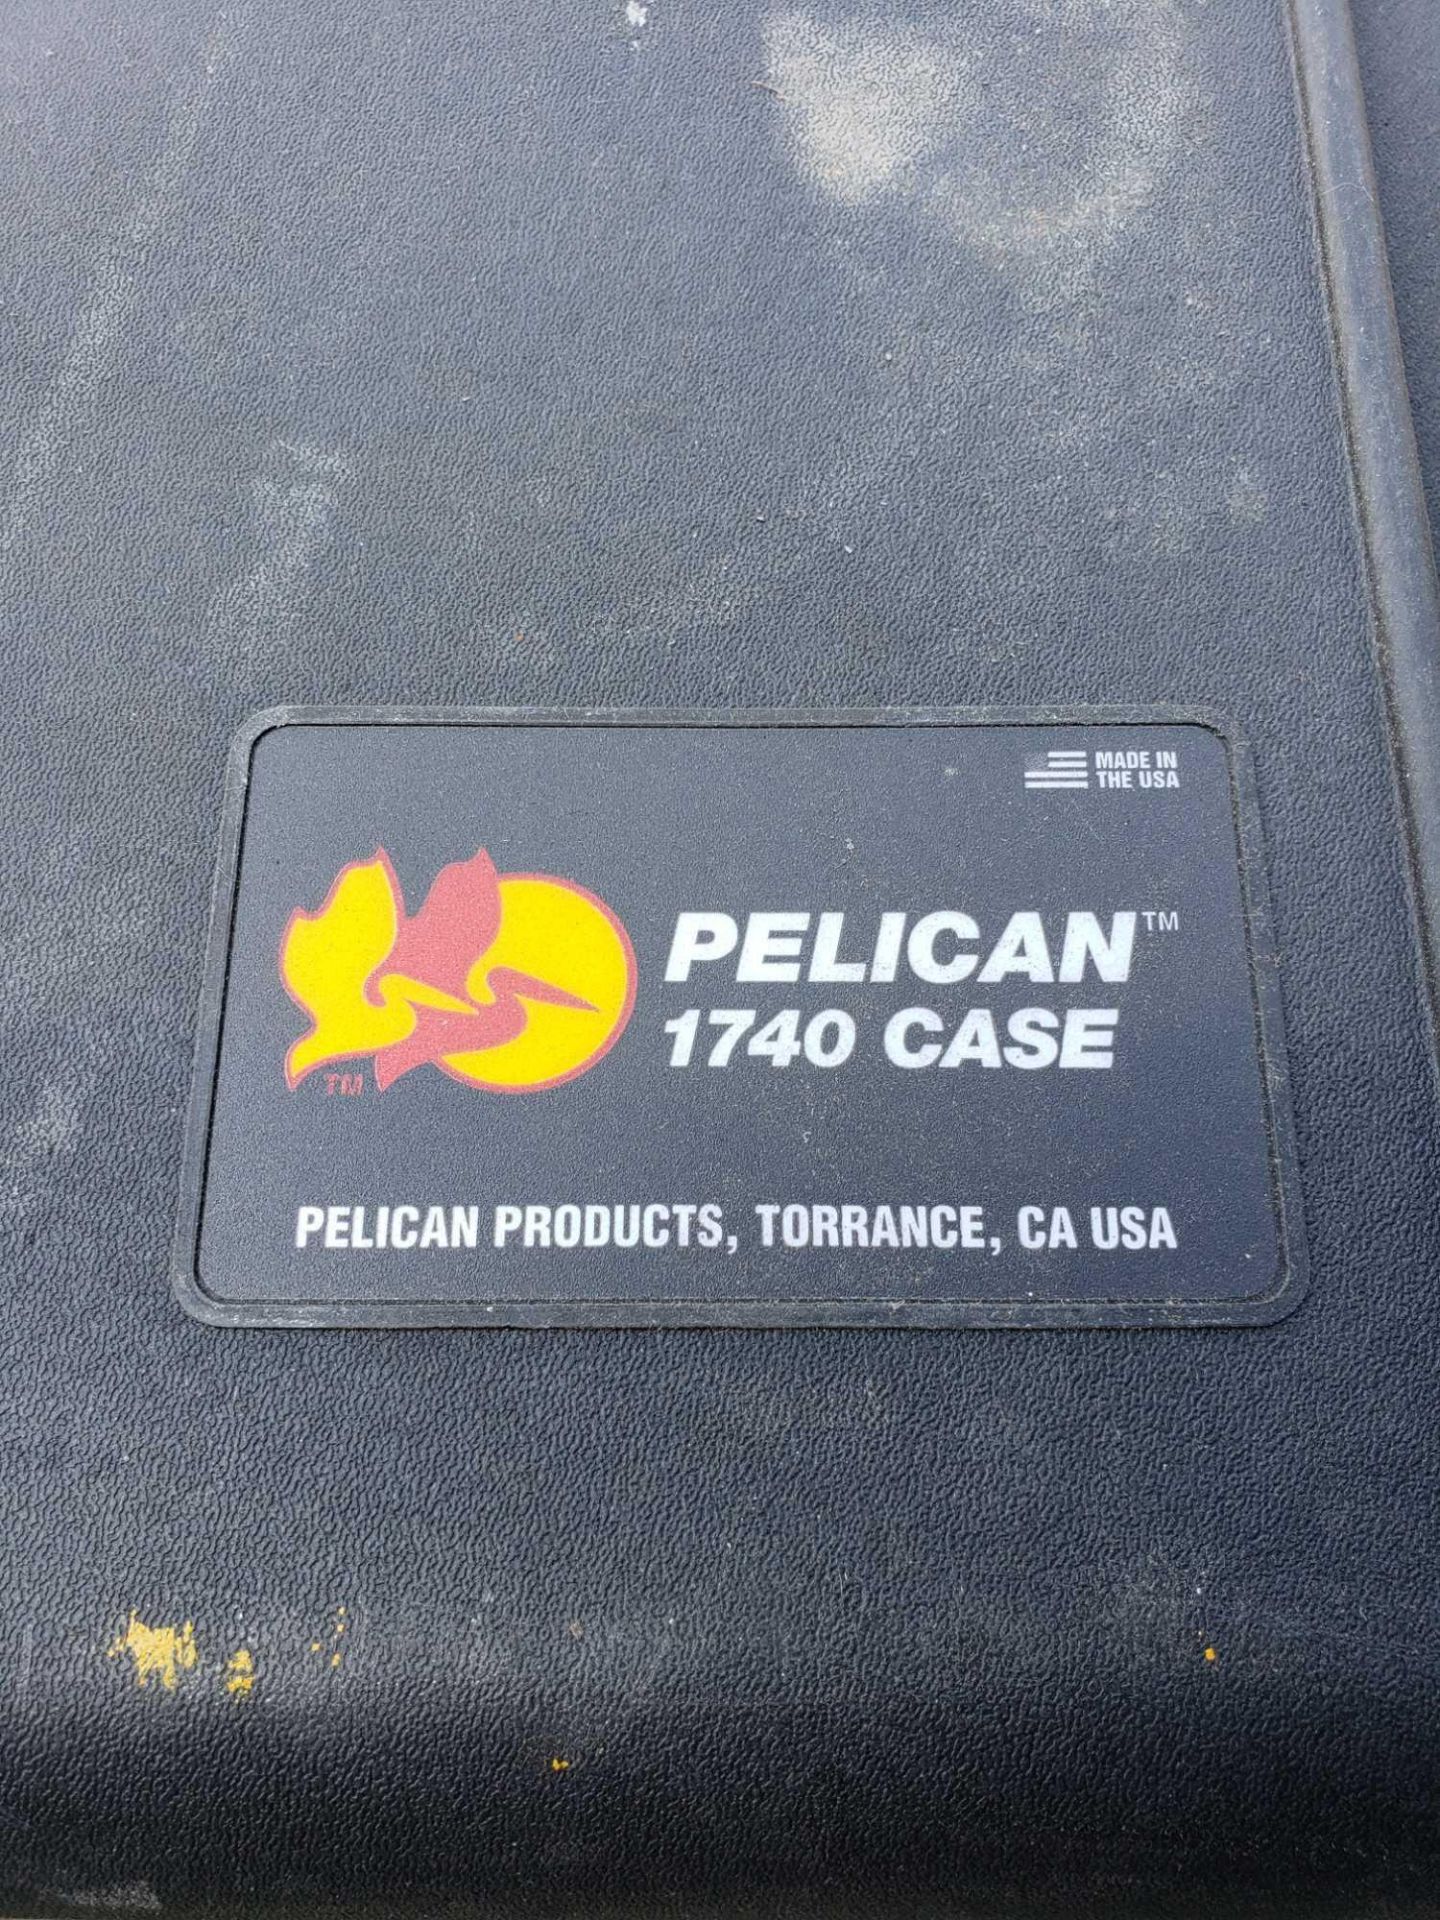 Pelican 1740 Case w convention display hardware. - Image 3 of 5